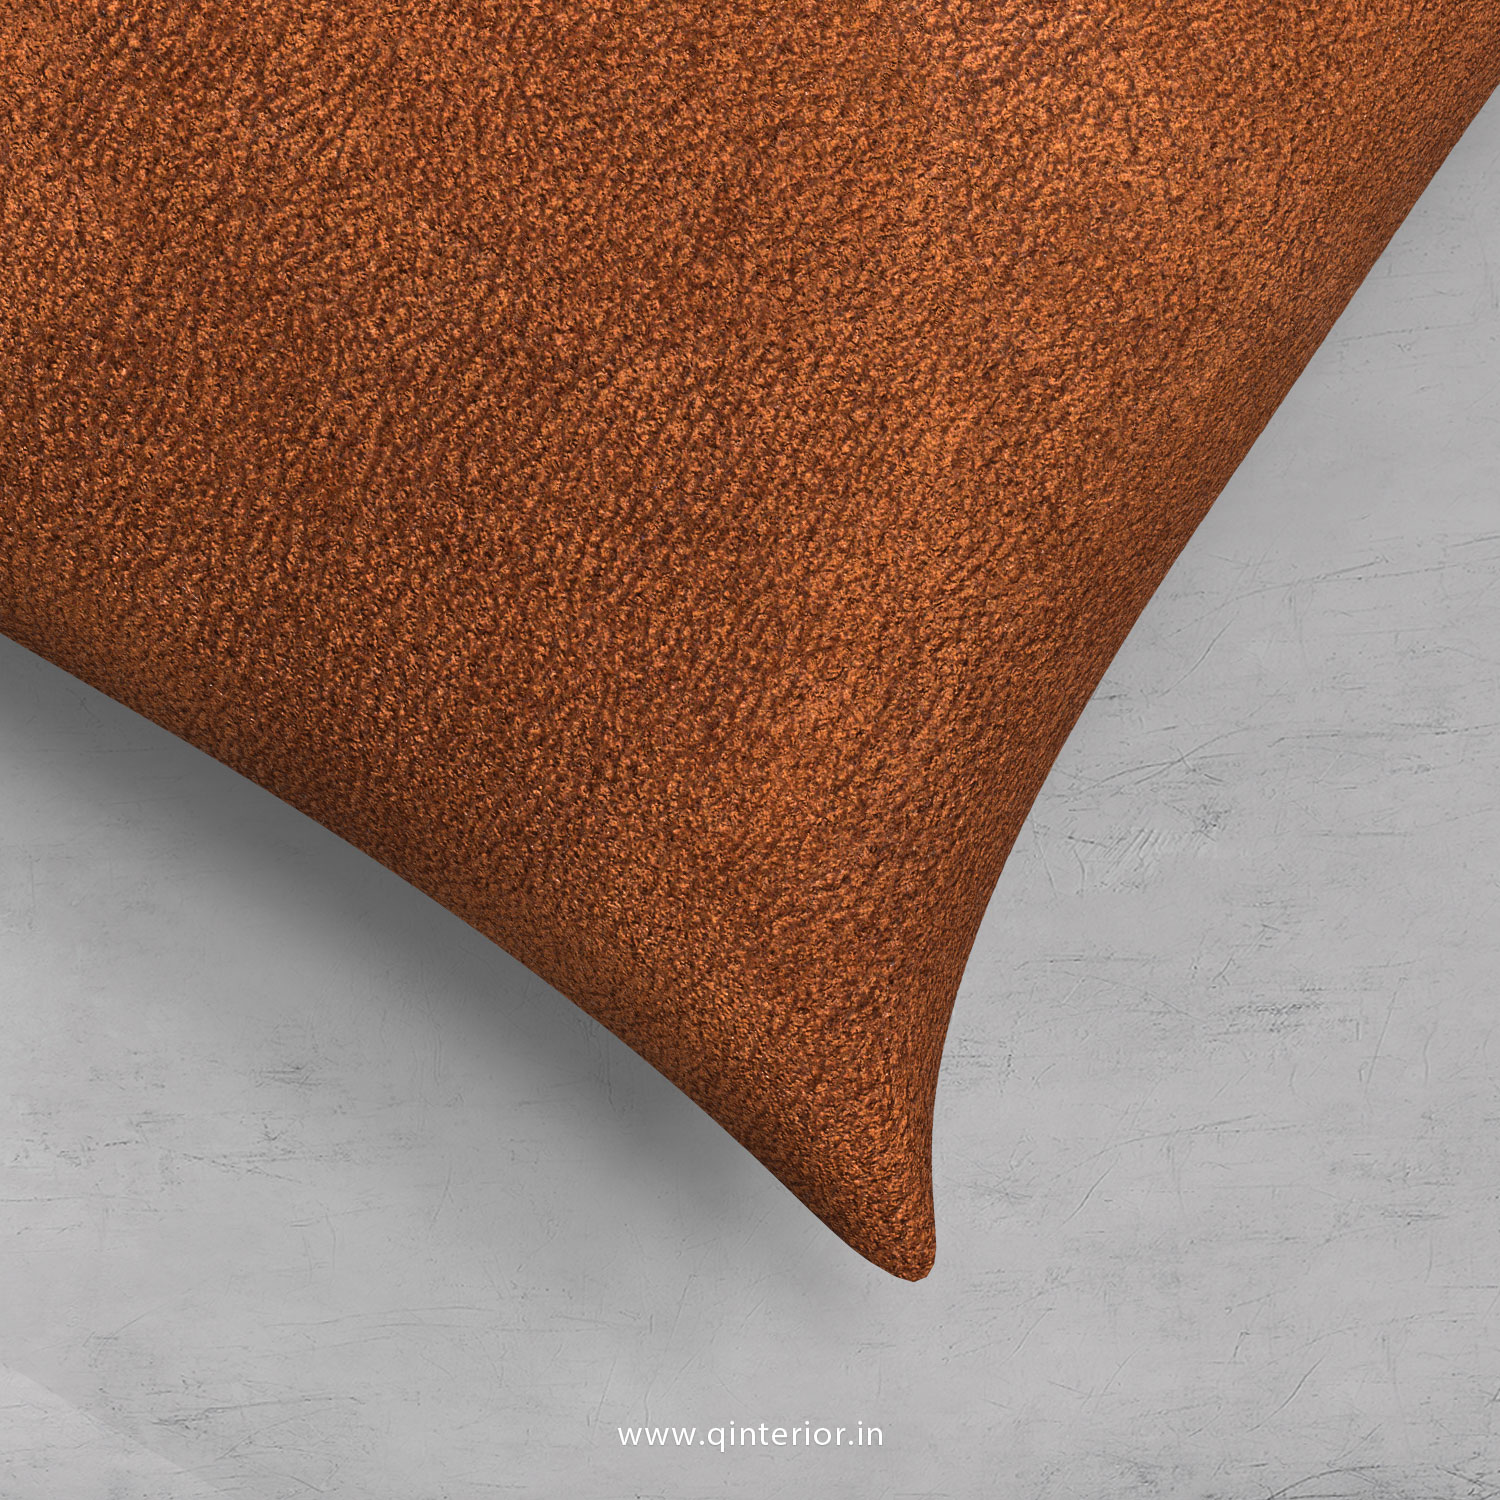 Cushion With Cushion Cover in Fab Leather - CUS001 FL09